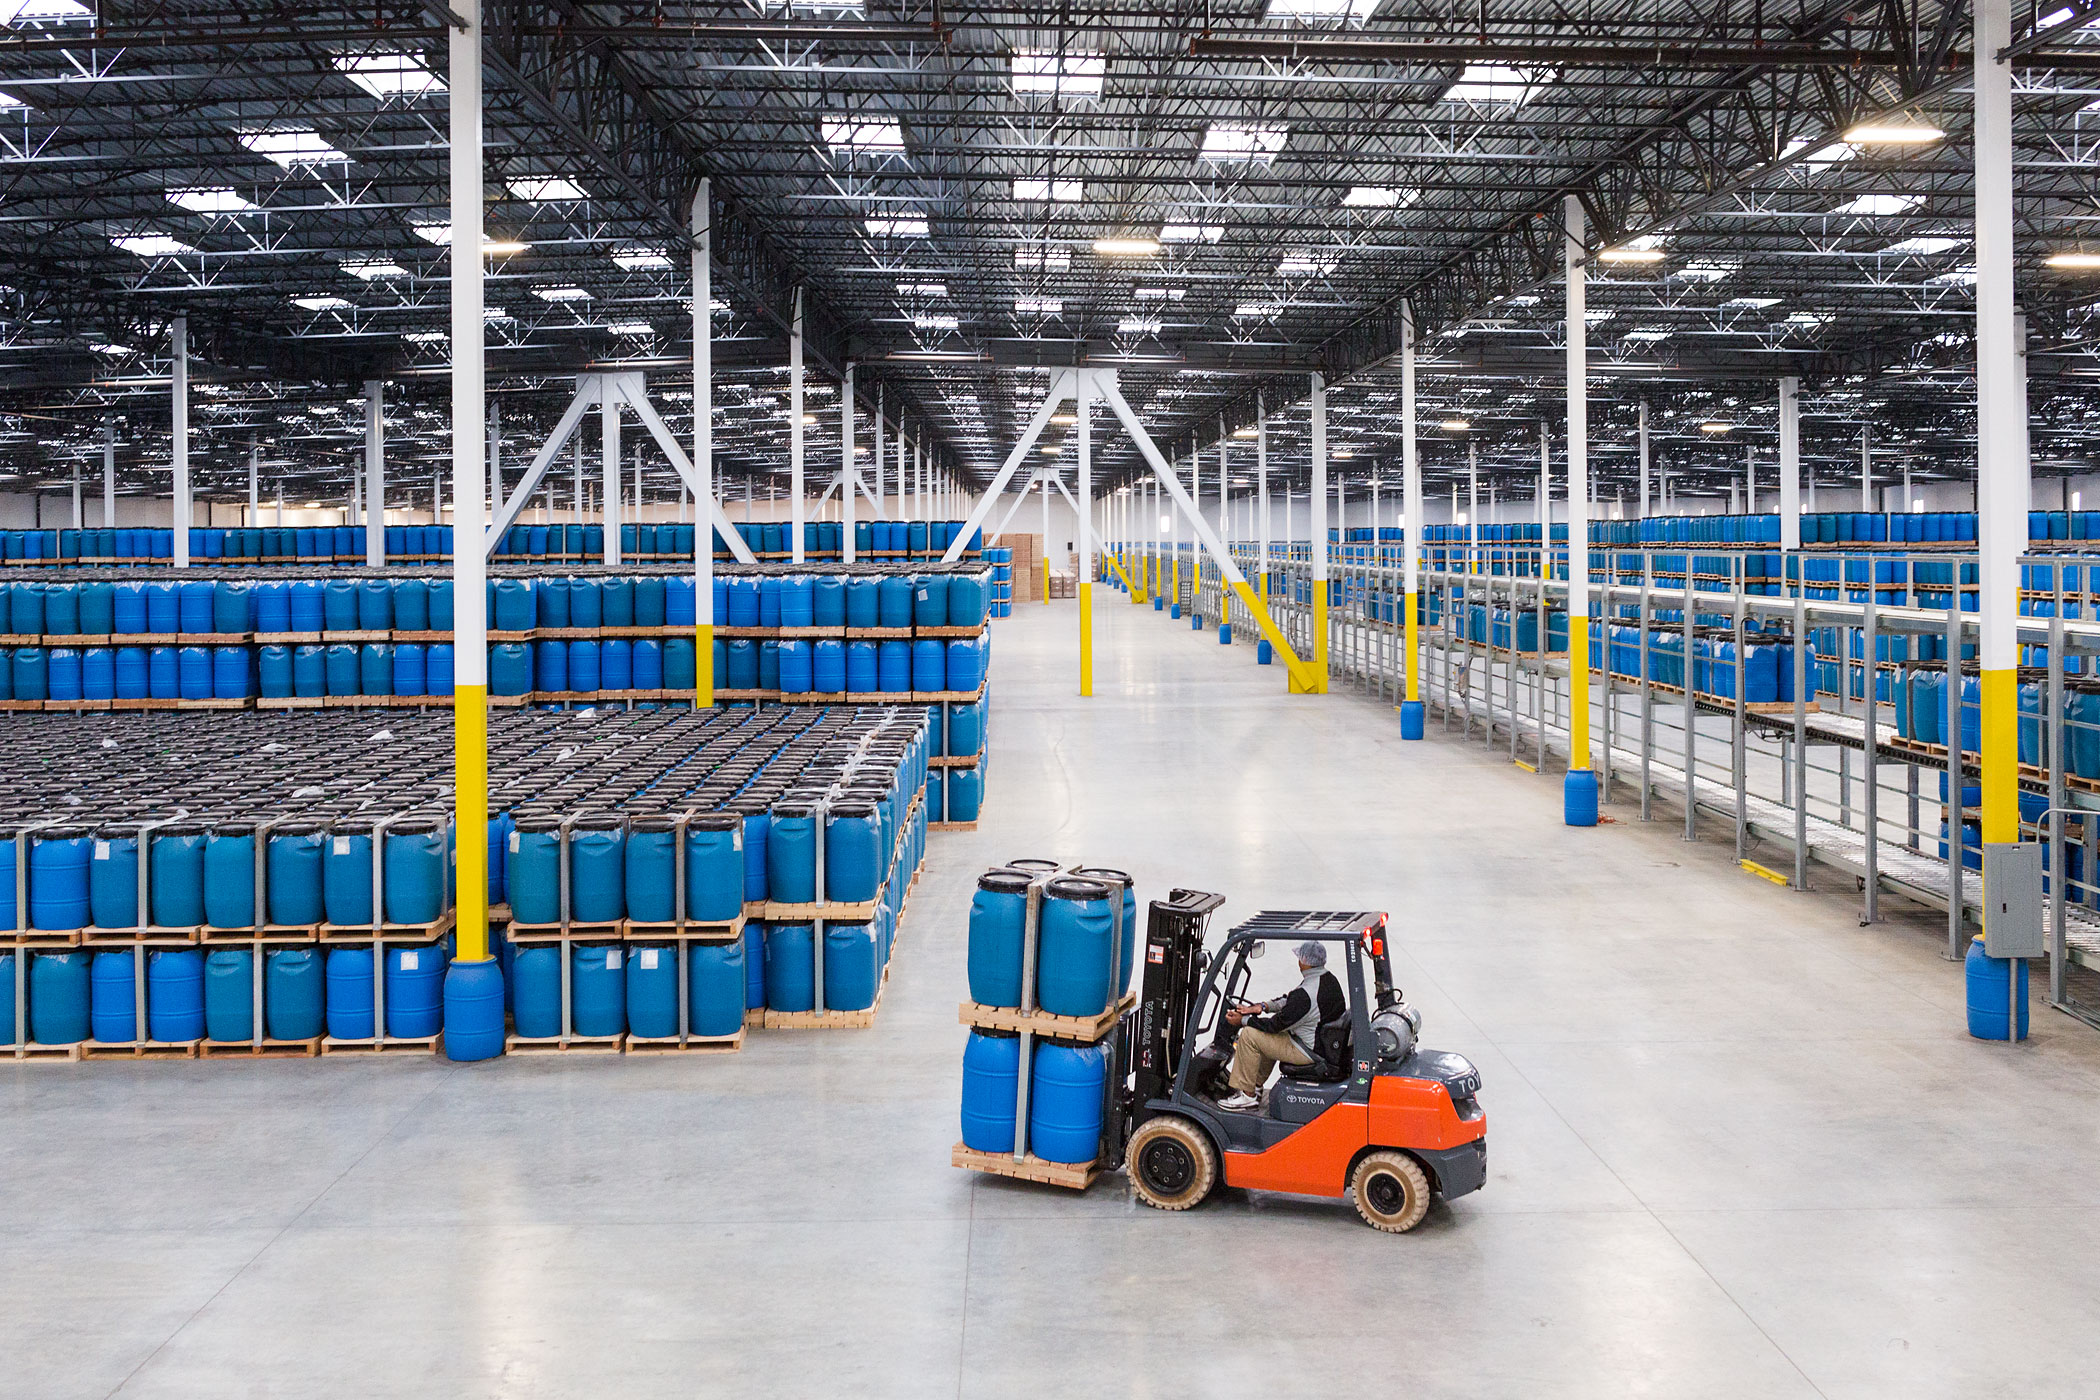 A forklift moves barrels of chili around the warehouse where they are stored until needed for processing into Sriracha, Chili Garlic and Sambal Olek—ground chilis with no added ingredients.